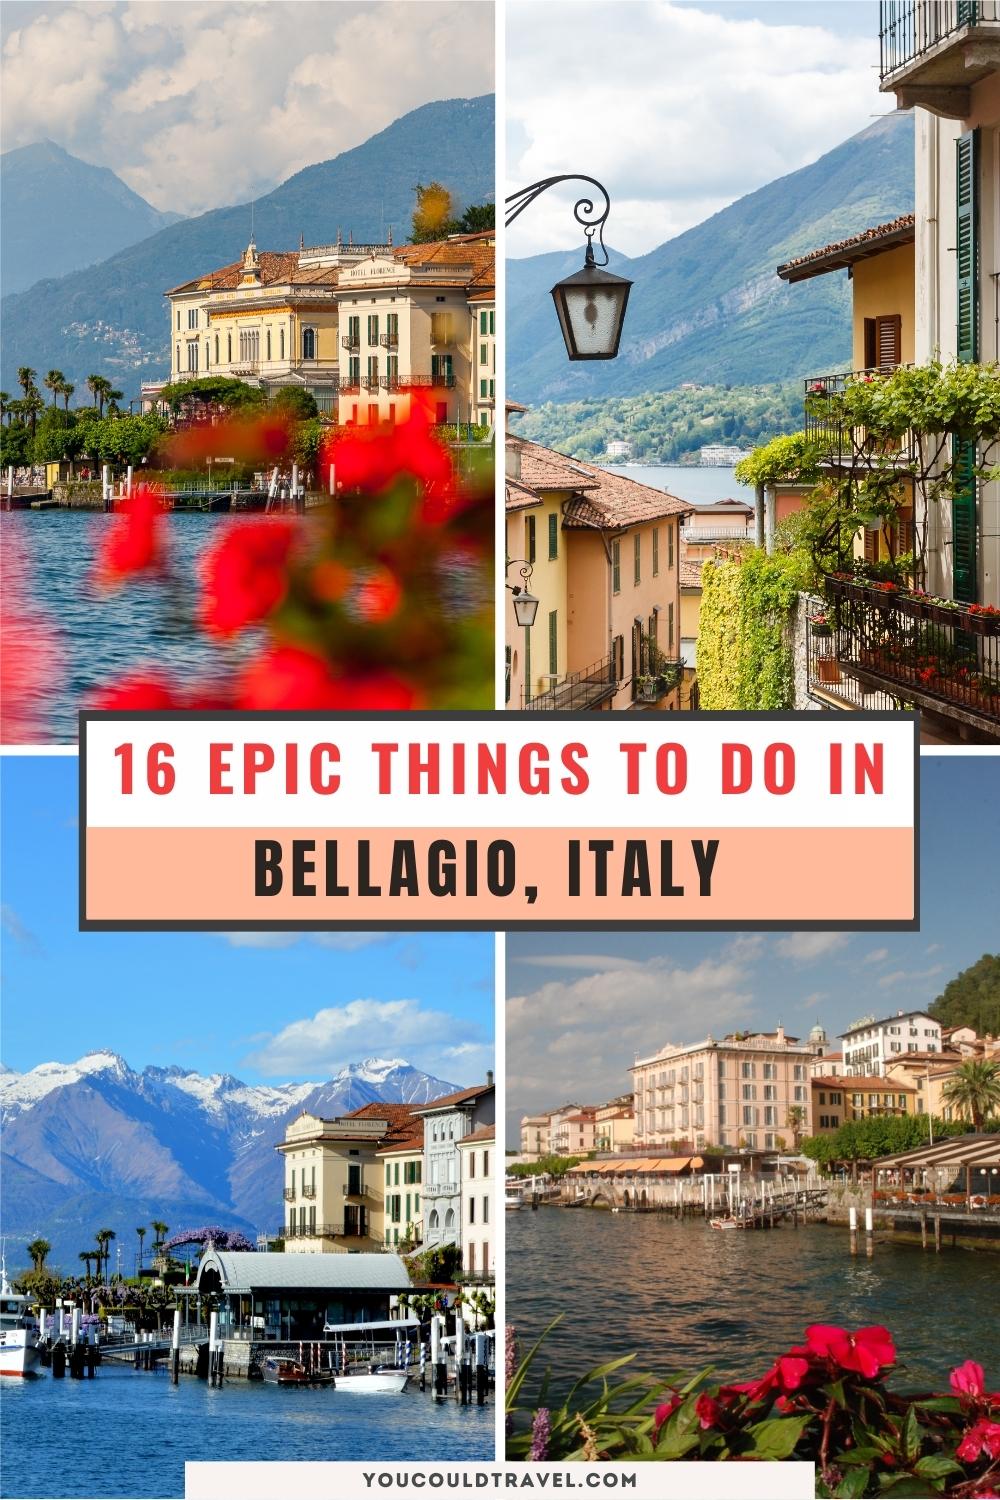 Things to do in Bellagio, Italy